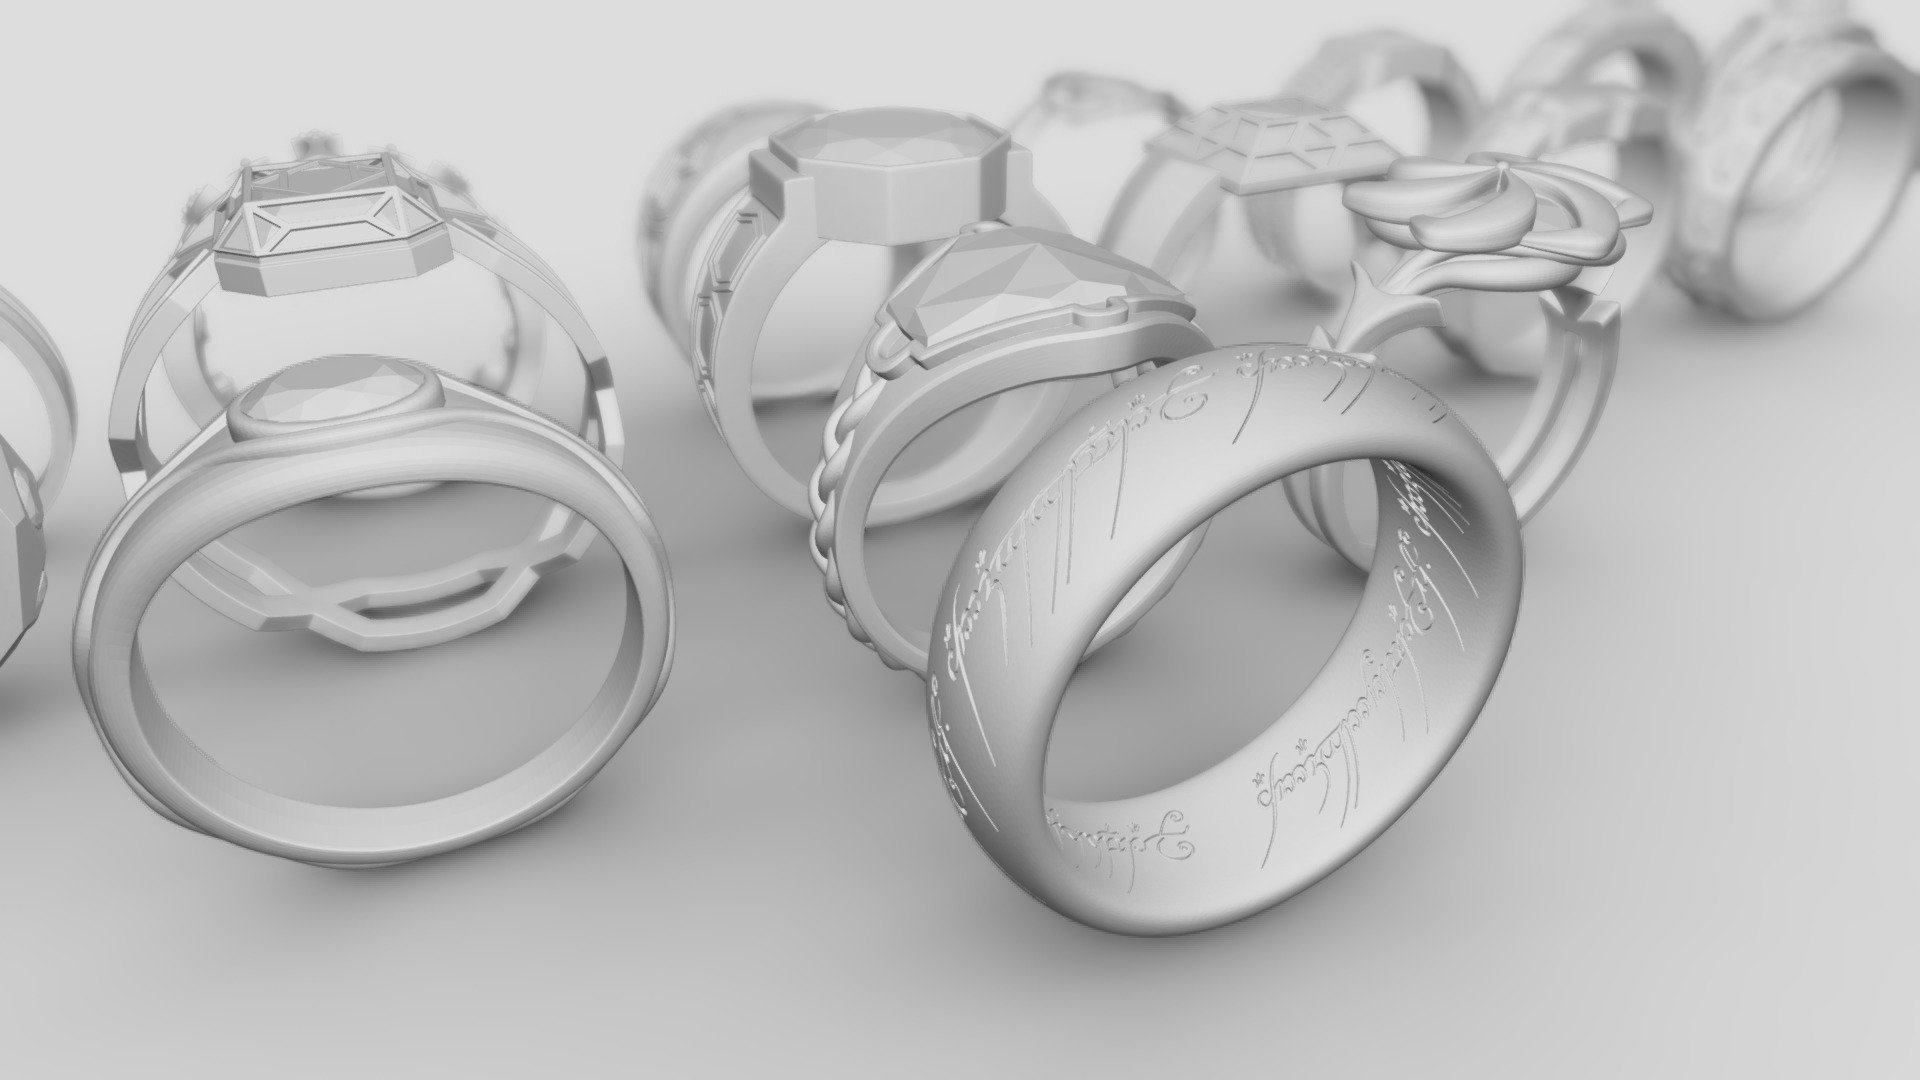 How To Create a 3D Printed Ring - Tutorial | 3D Printing Blog |  i.materialise